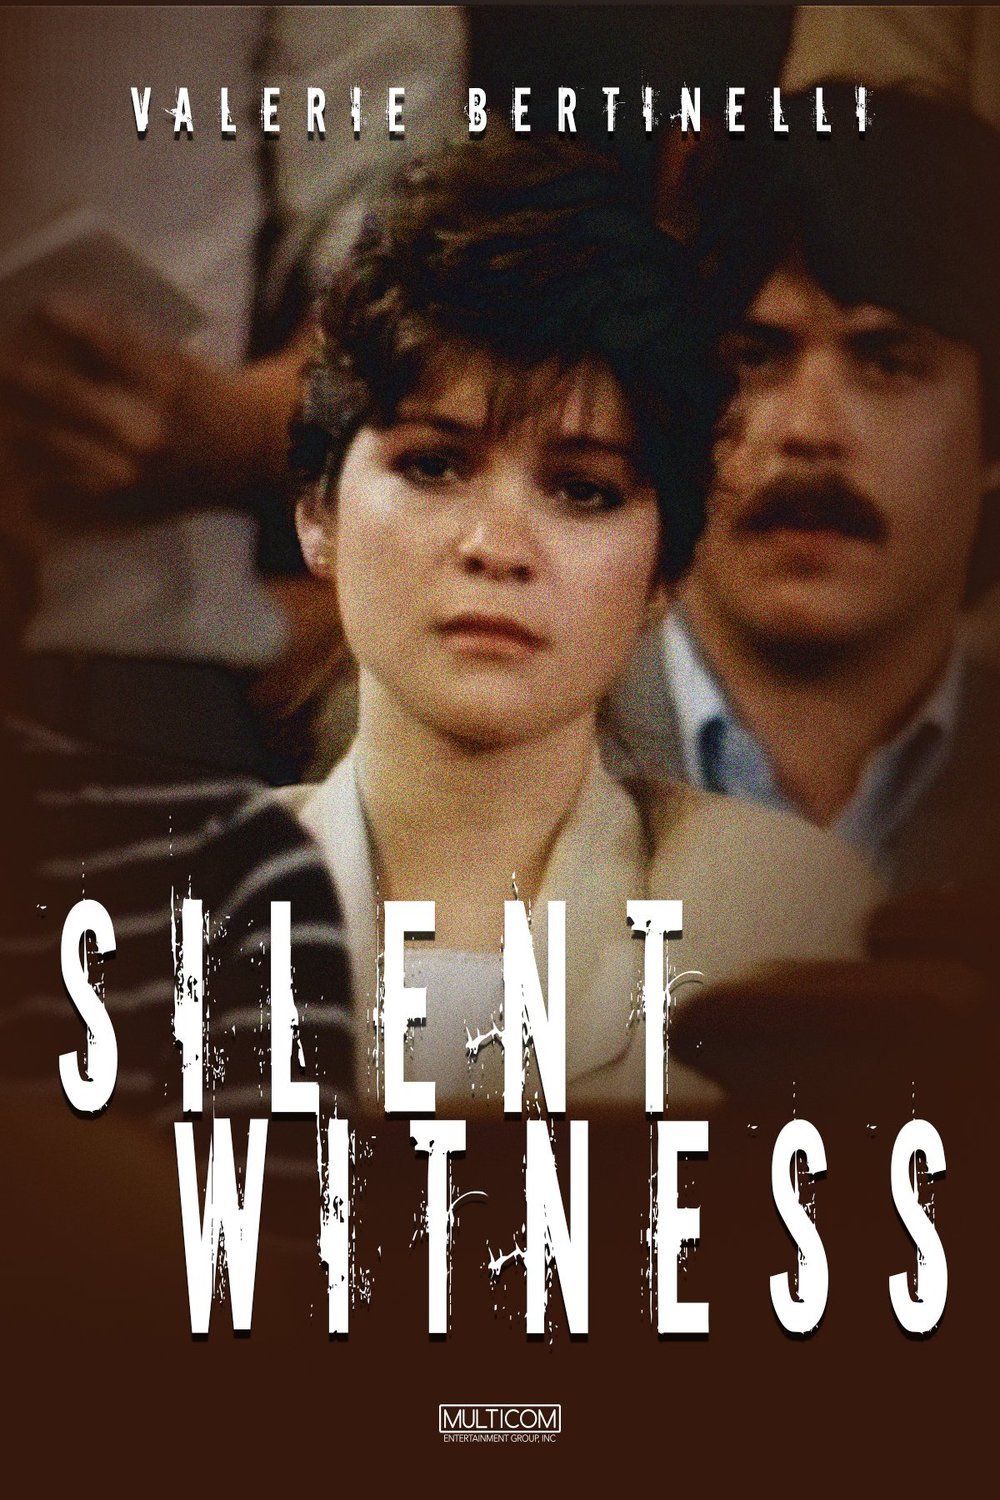 Poster of the movie Silent Witness